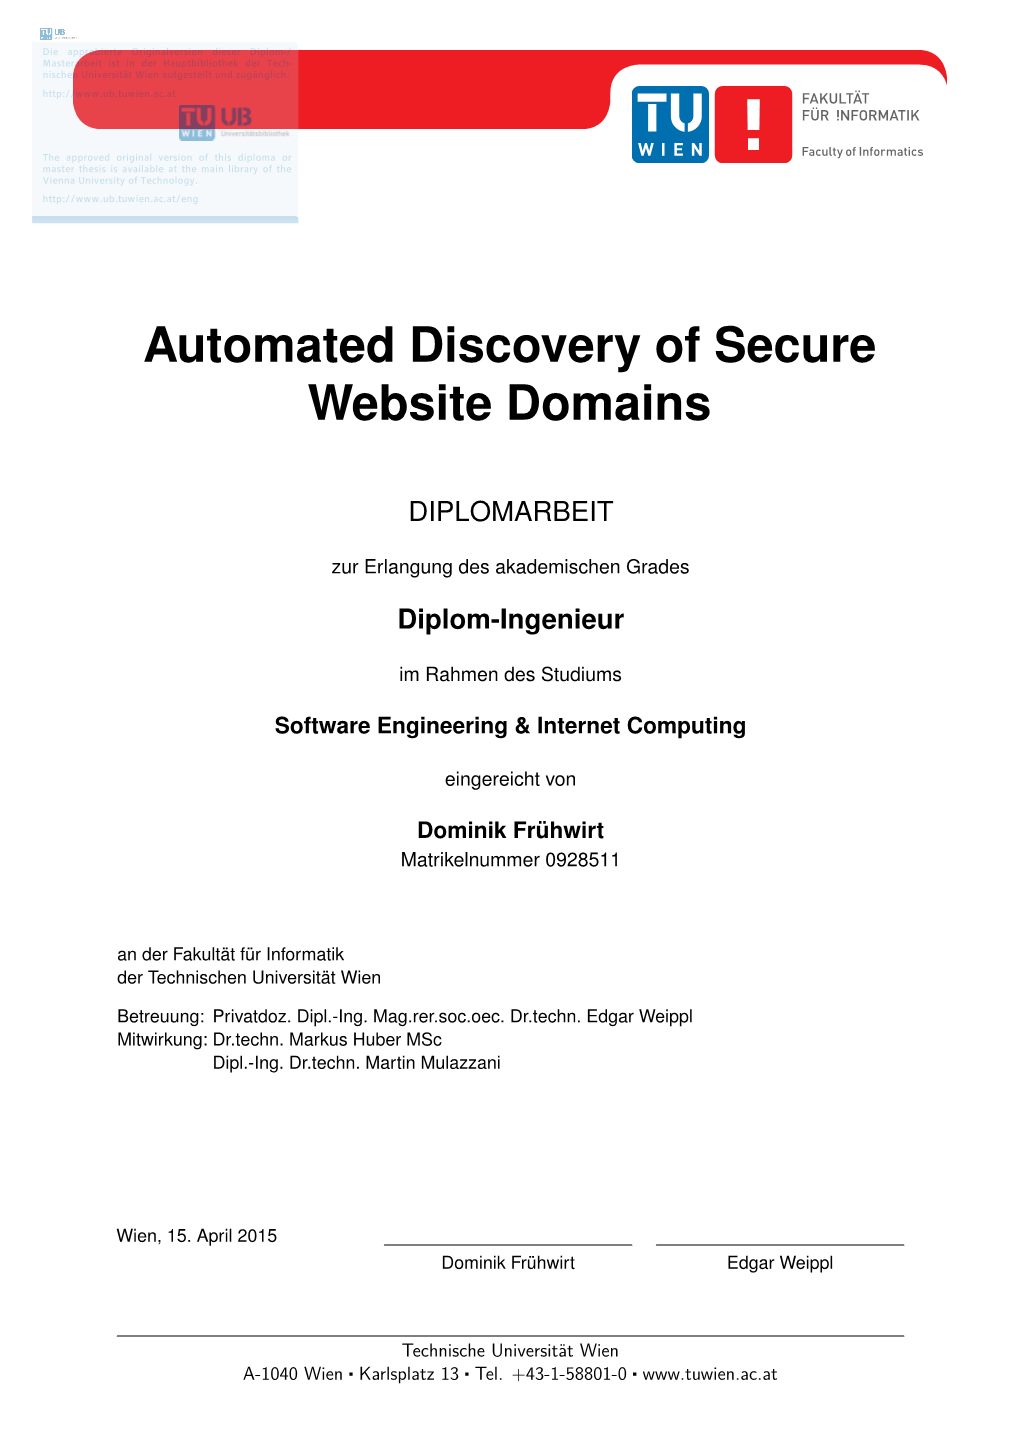 Automated Discovery of Secure Website Domains